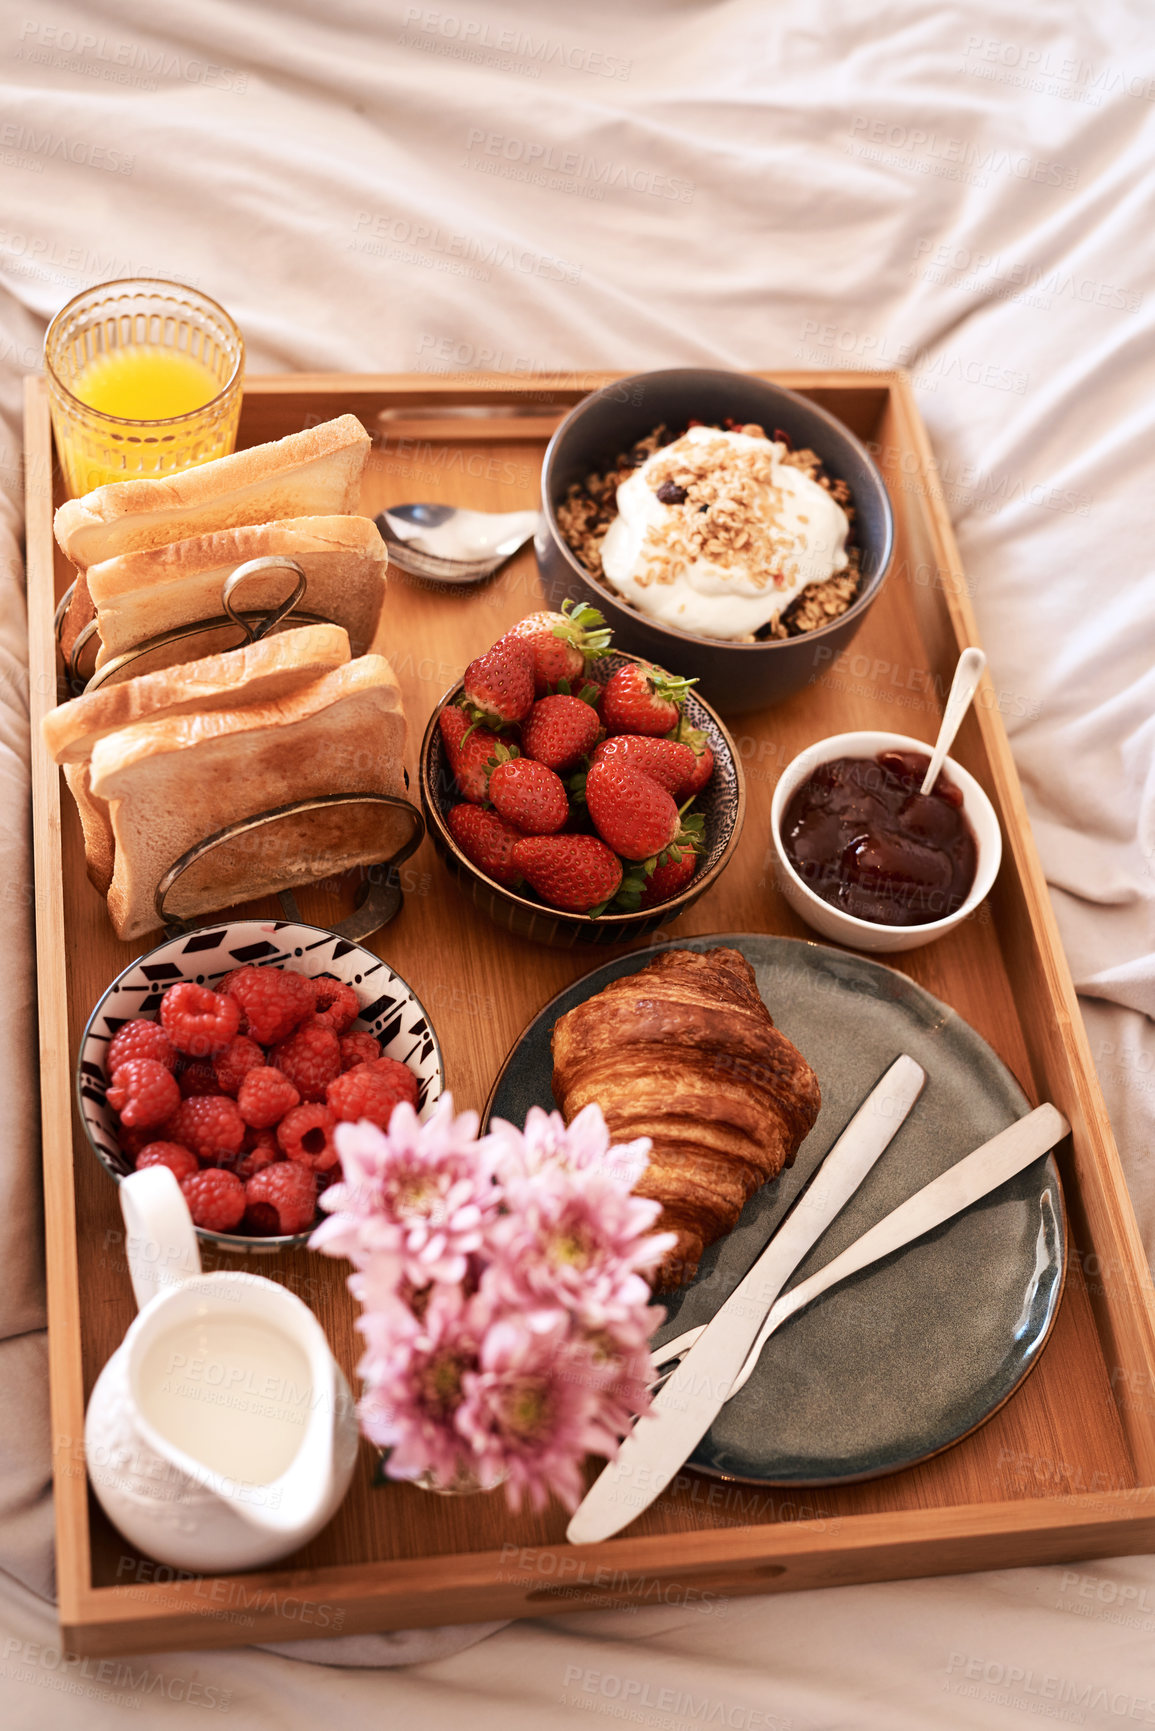 Buy stock photo High angle shot of a delicious breakfast spread on a bed at home